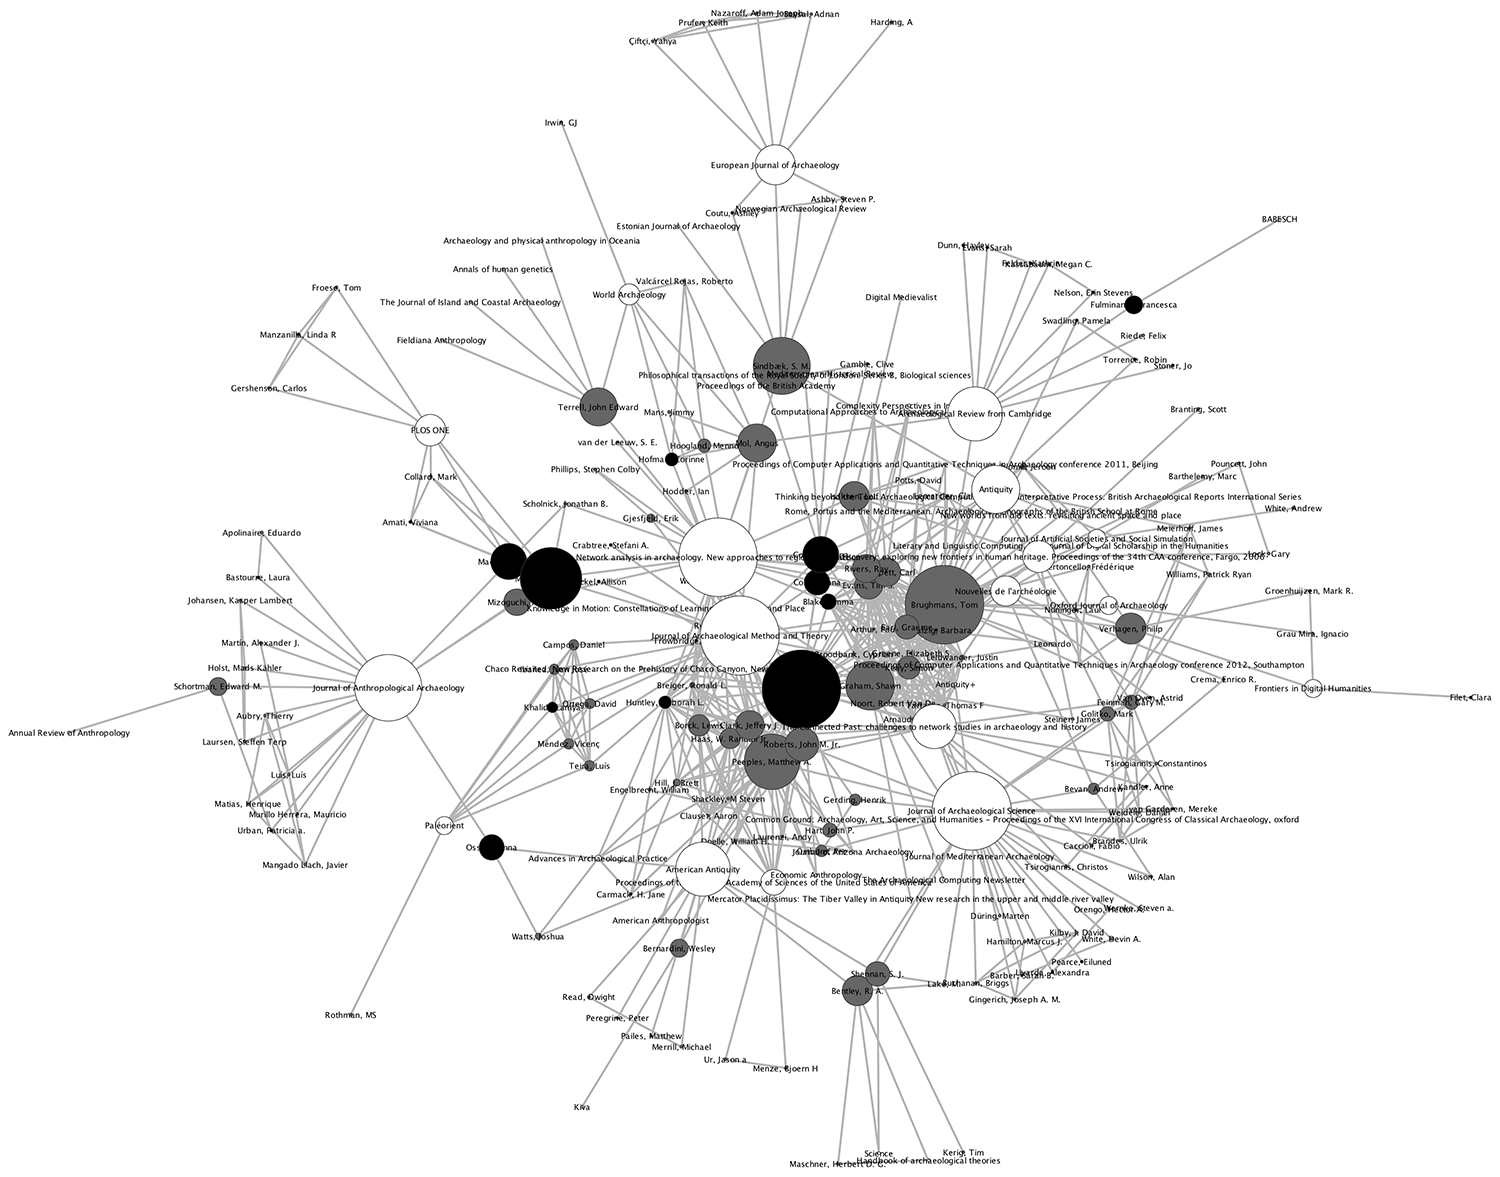 Two-mode archaeological publication network, representing a set of individual authors as nodes who are connected to nodes in a set of publication venues (journals, books, proceedings) in which they have published (see Brughmans and Peeples 2017:Fig. 10).